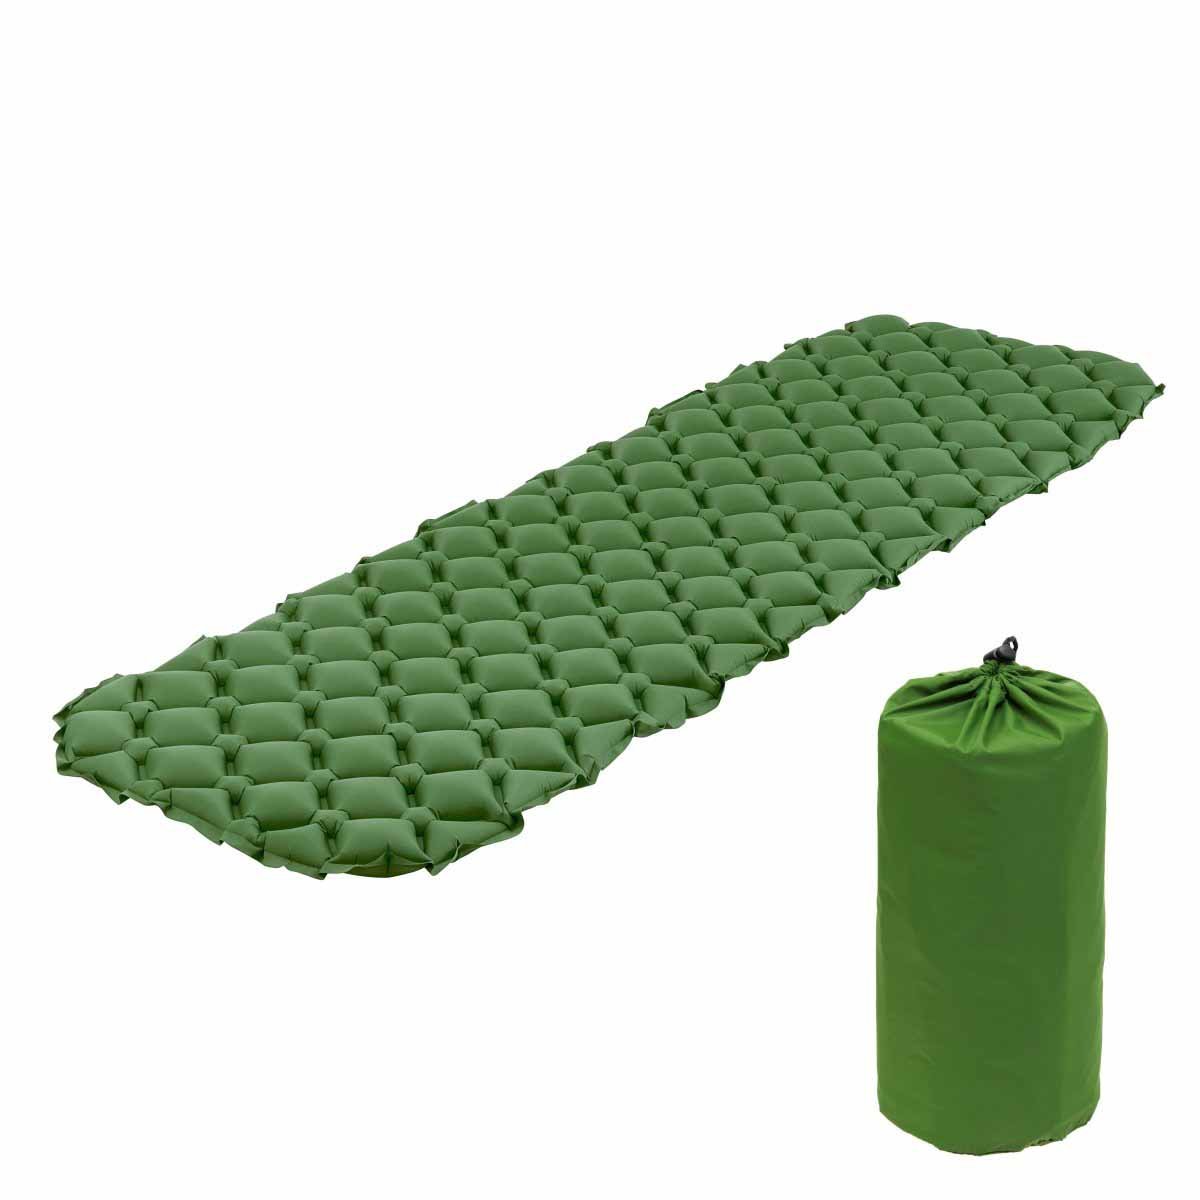 2-inch Waterproof Camping Self Inflating Sleeping Pad with Carry Bag, Green